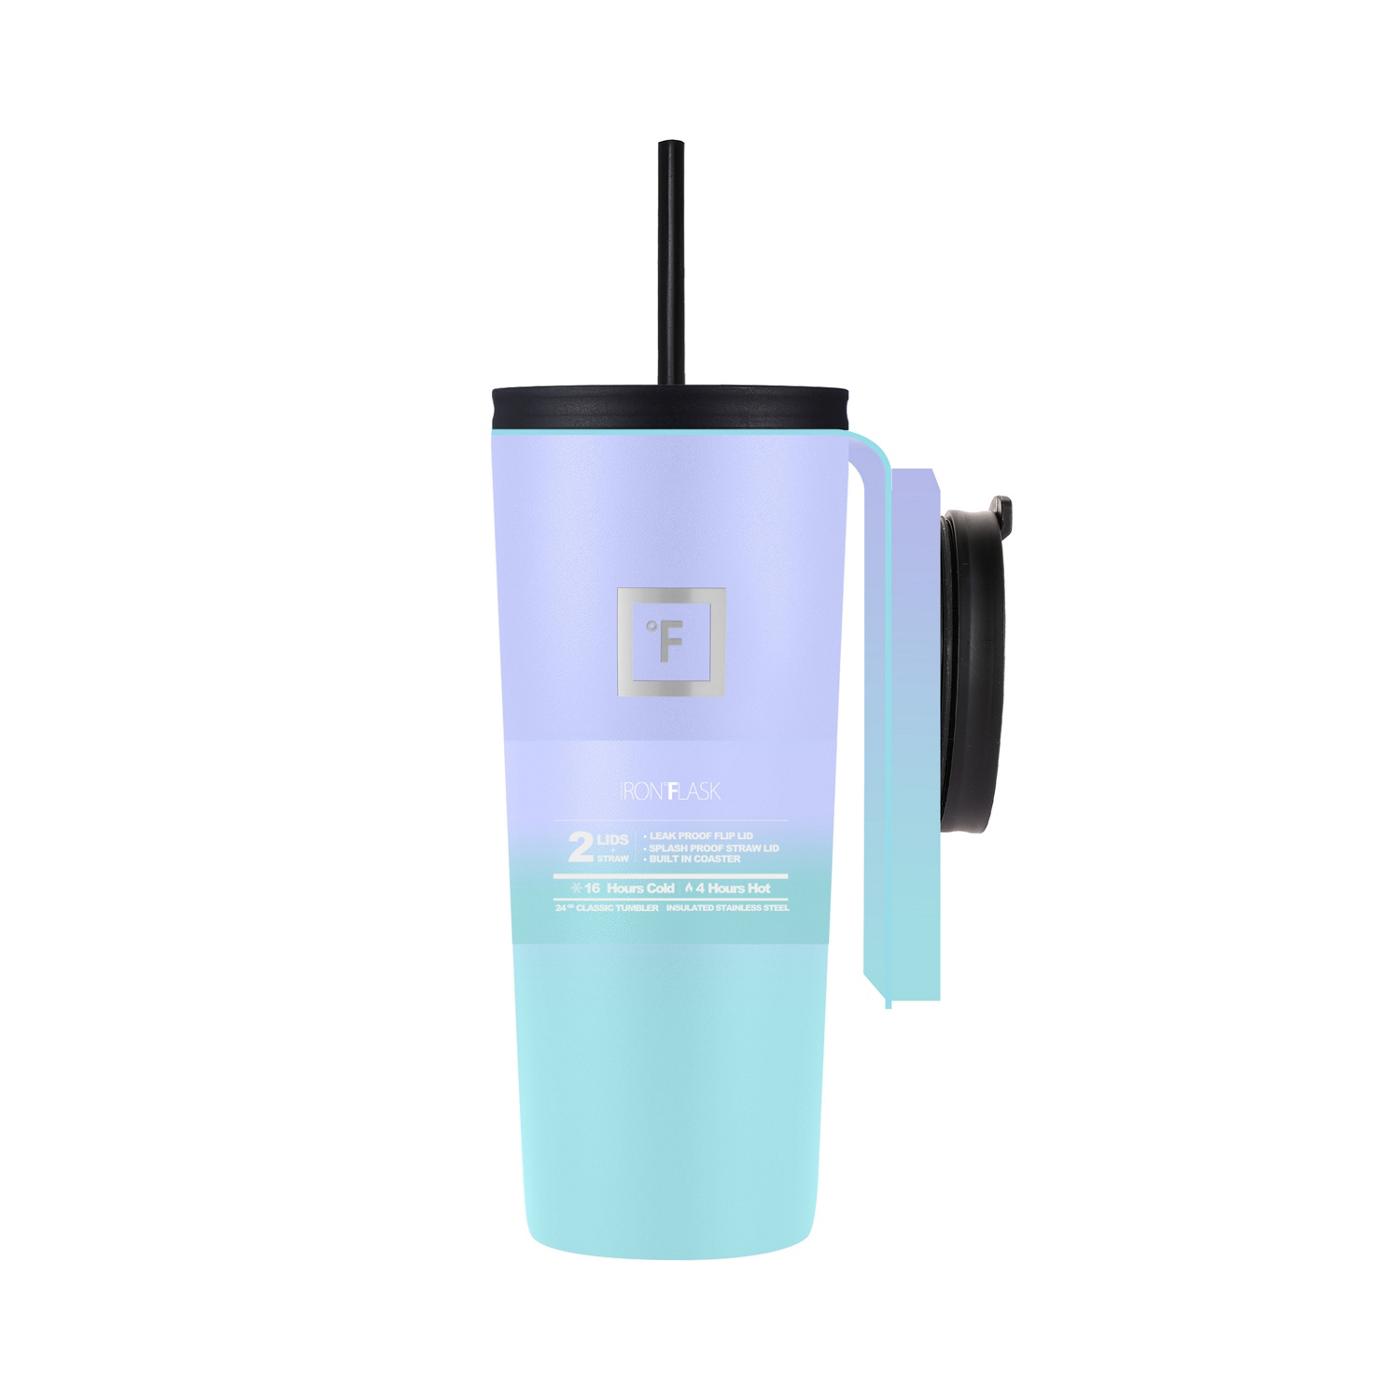 Iron Flask Classic 2.0 Tumbler with 2 Lids - Cotton Candy - Shop